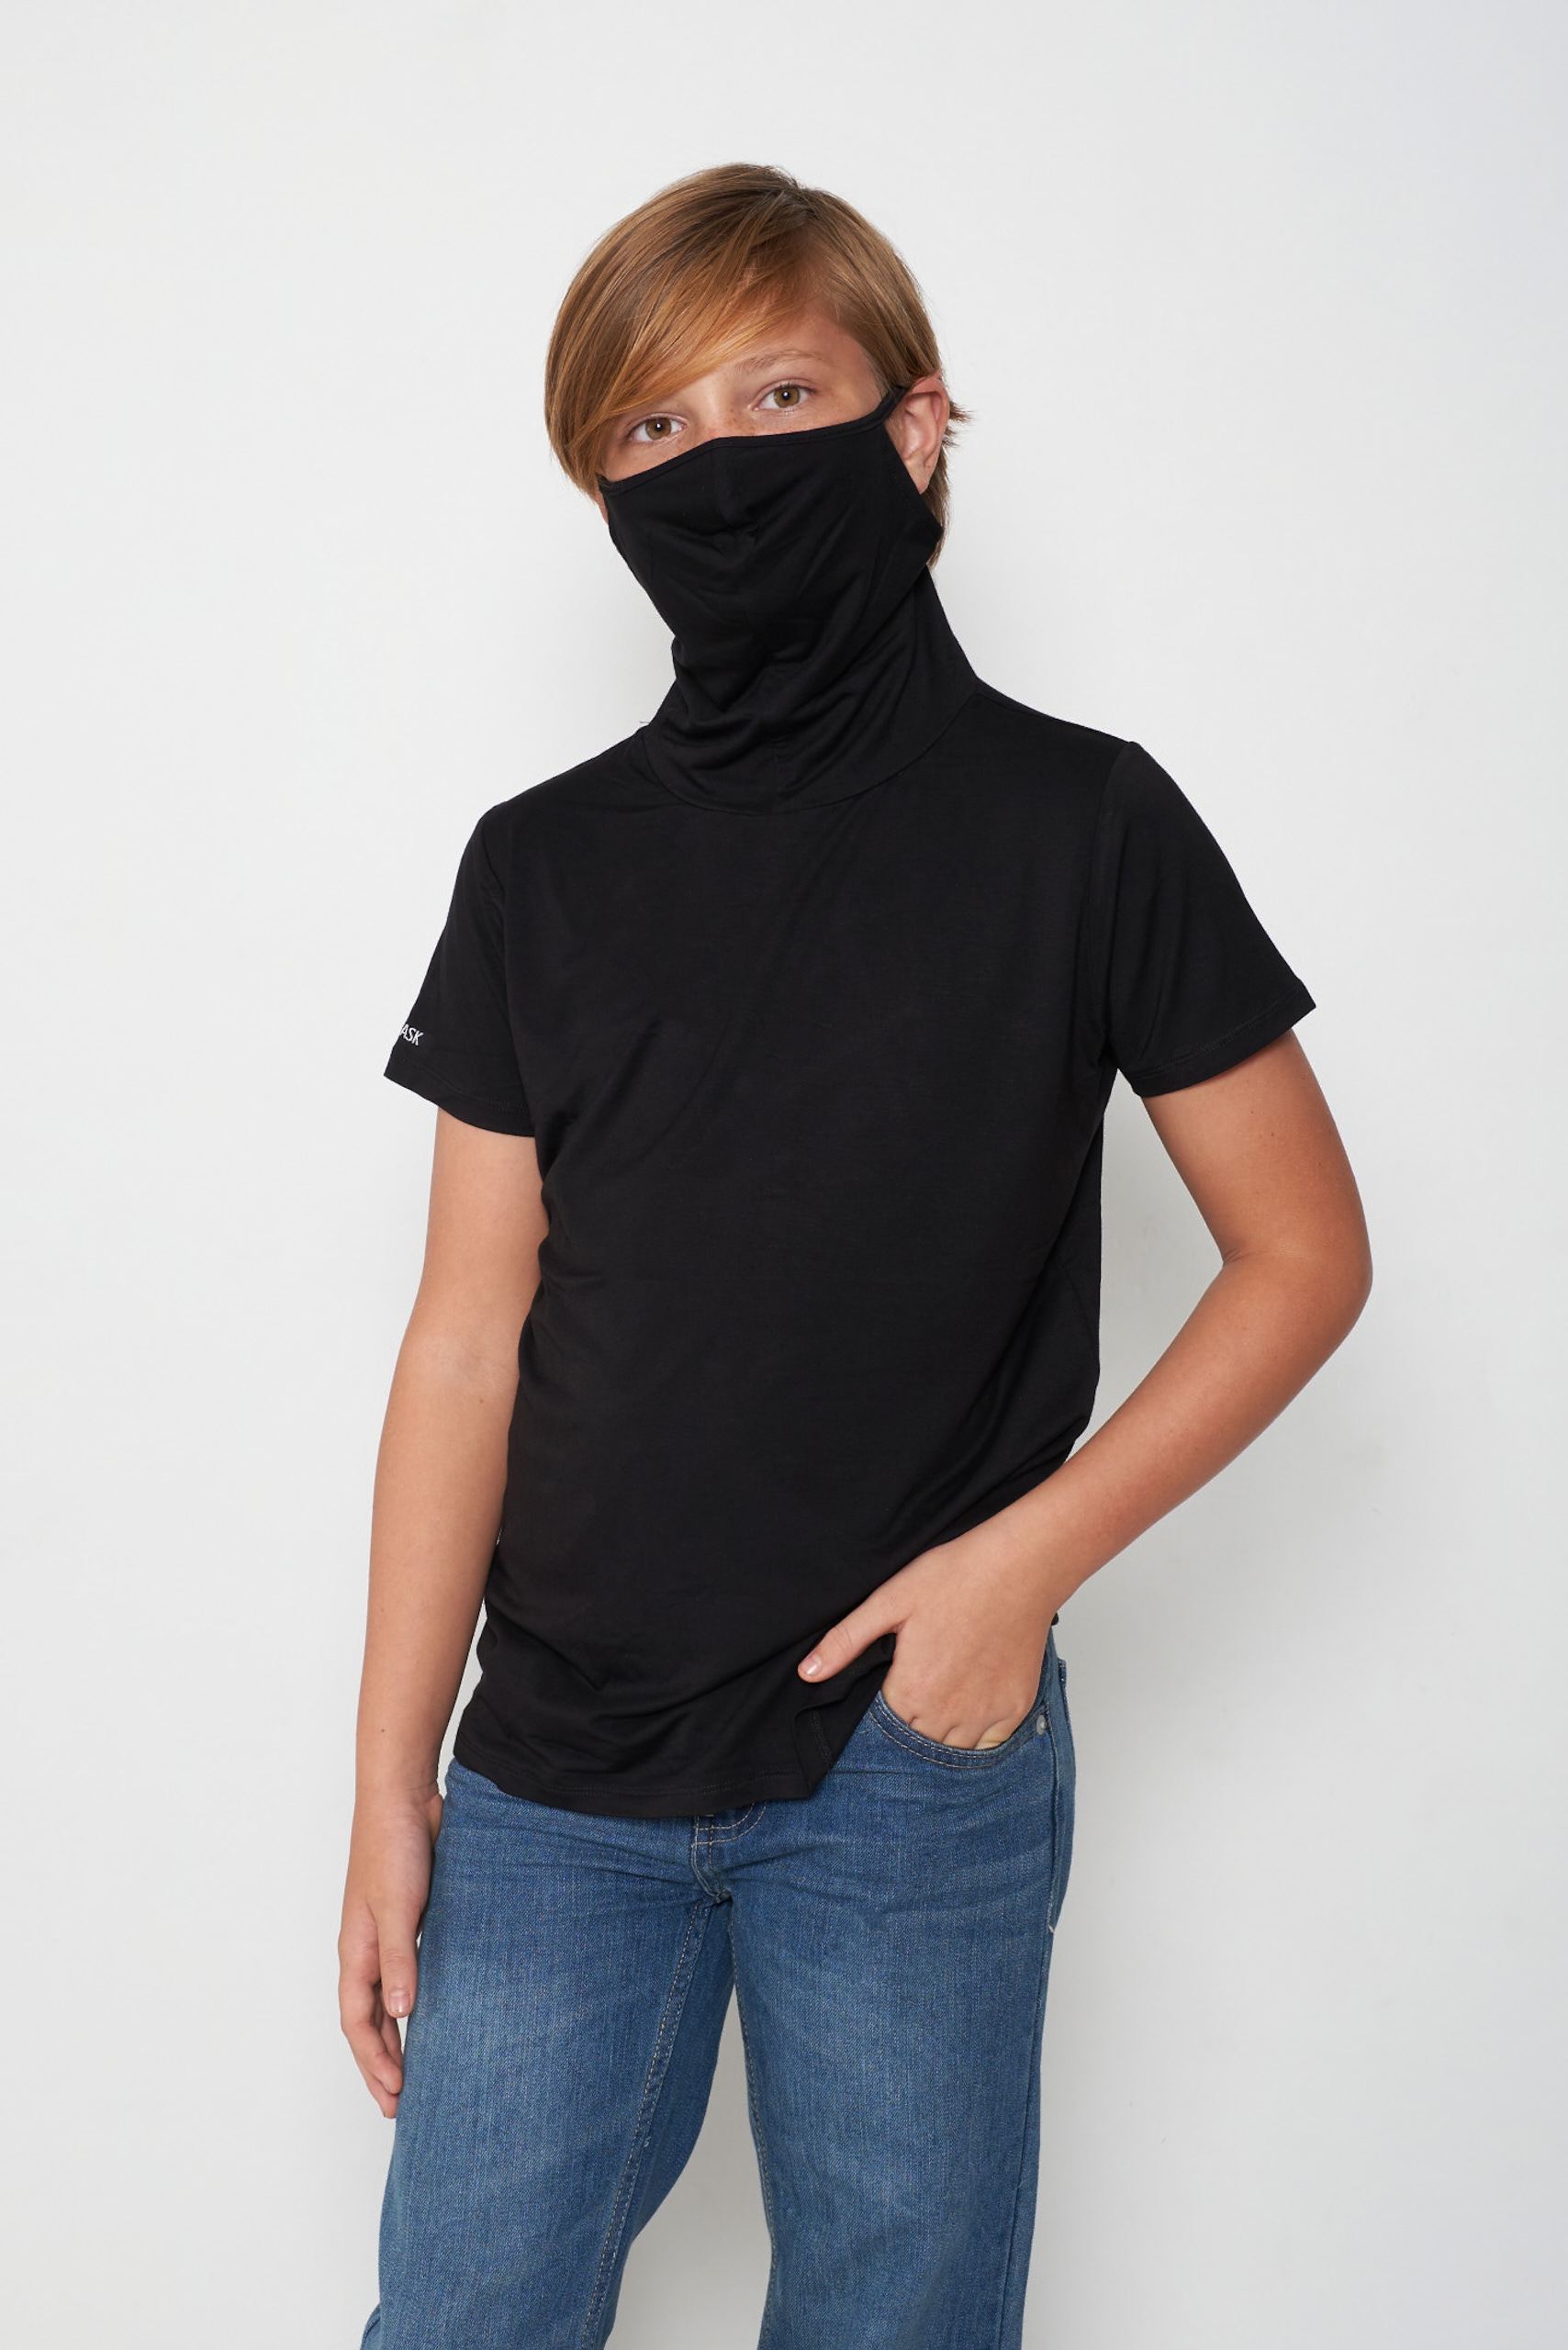 Kids Short Sleeve Black Shmask™ Earloop Face Mask for Kids and Adults